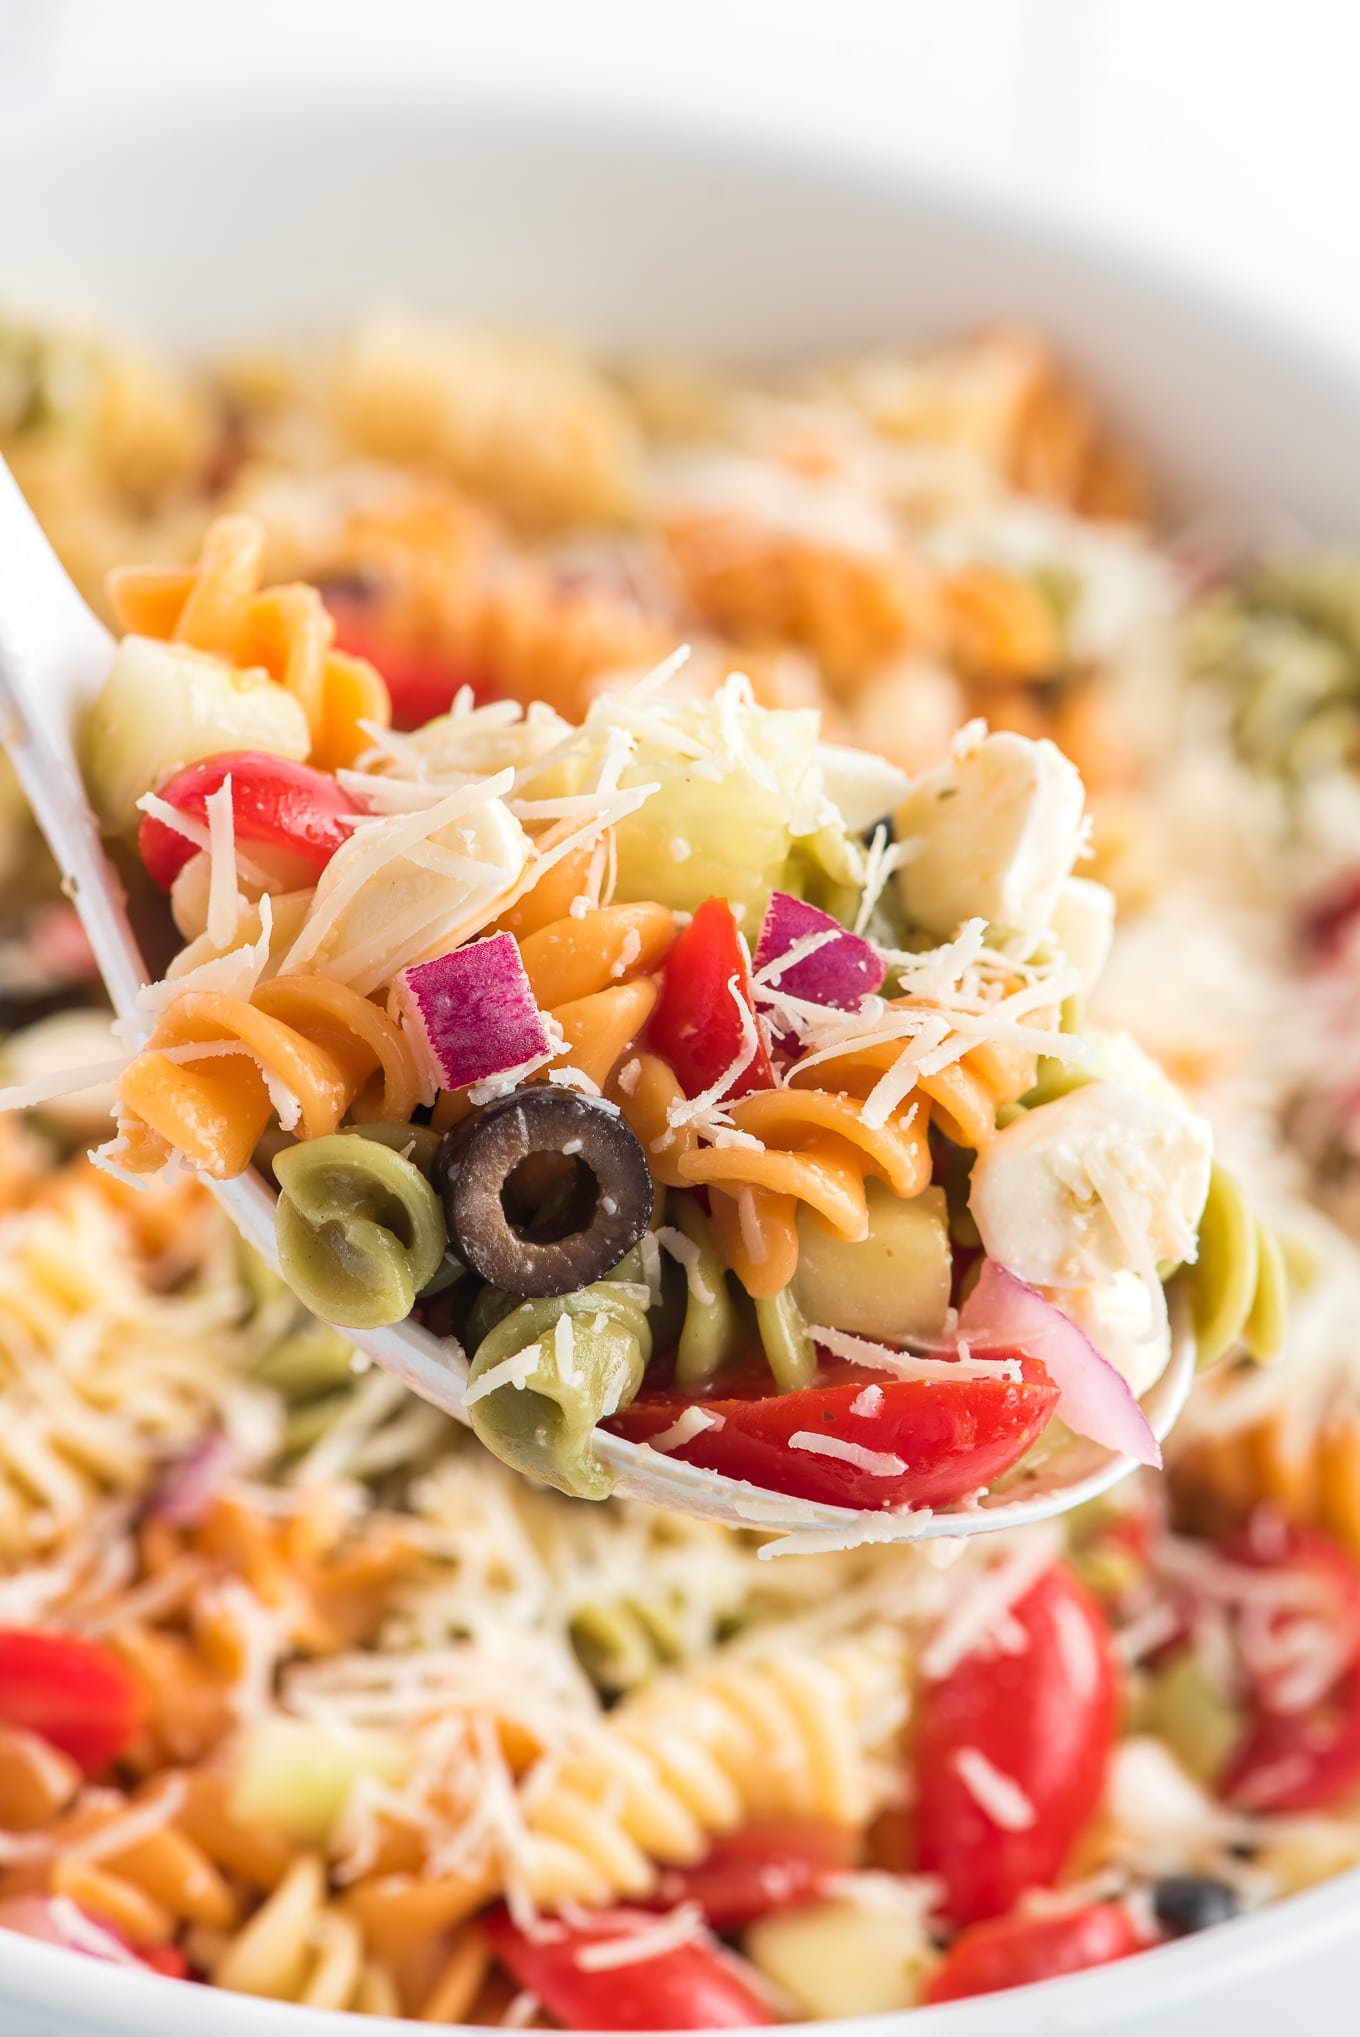 Pasta salad served on a spoon/ Easy Pasta Salad is the best cold pasta salad with tri color pasta, tomatoes, cucumbers, onions, and mozzarella cheese tossed in olive garden Italian dressing. 